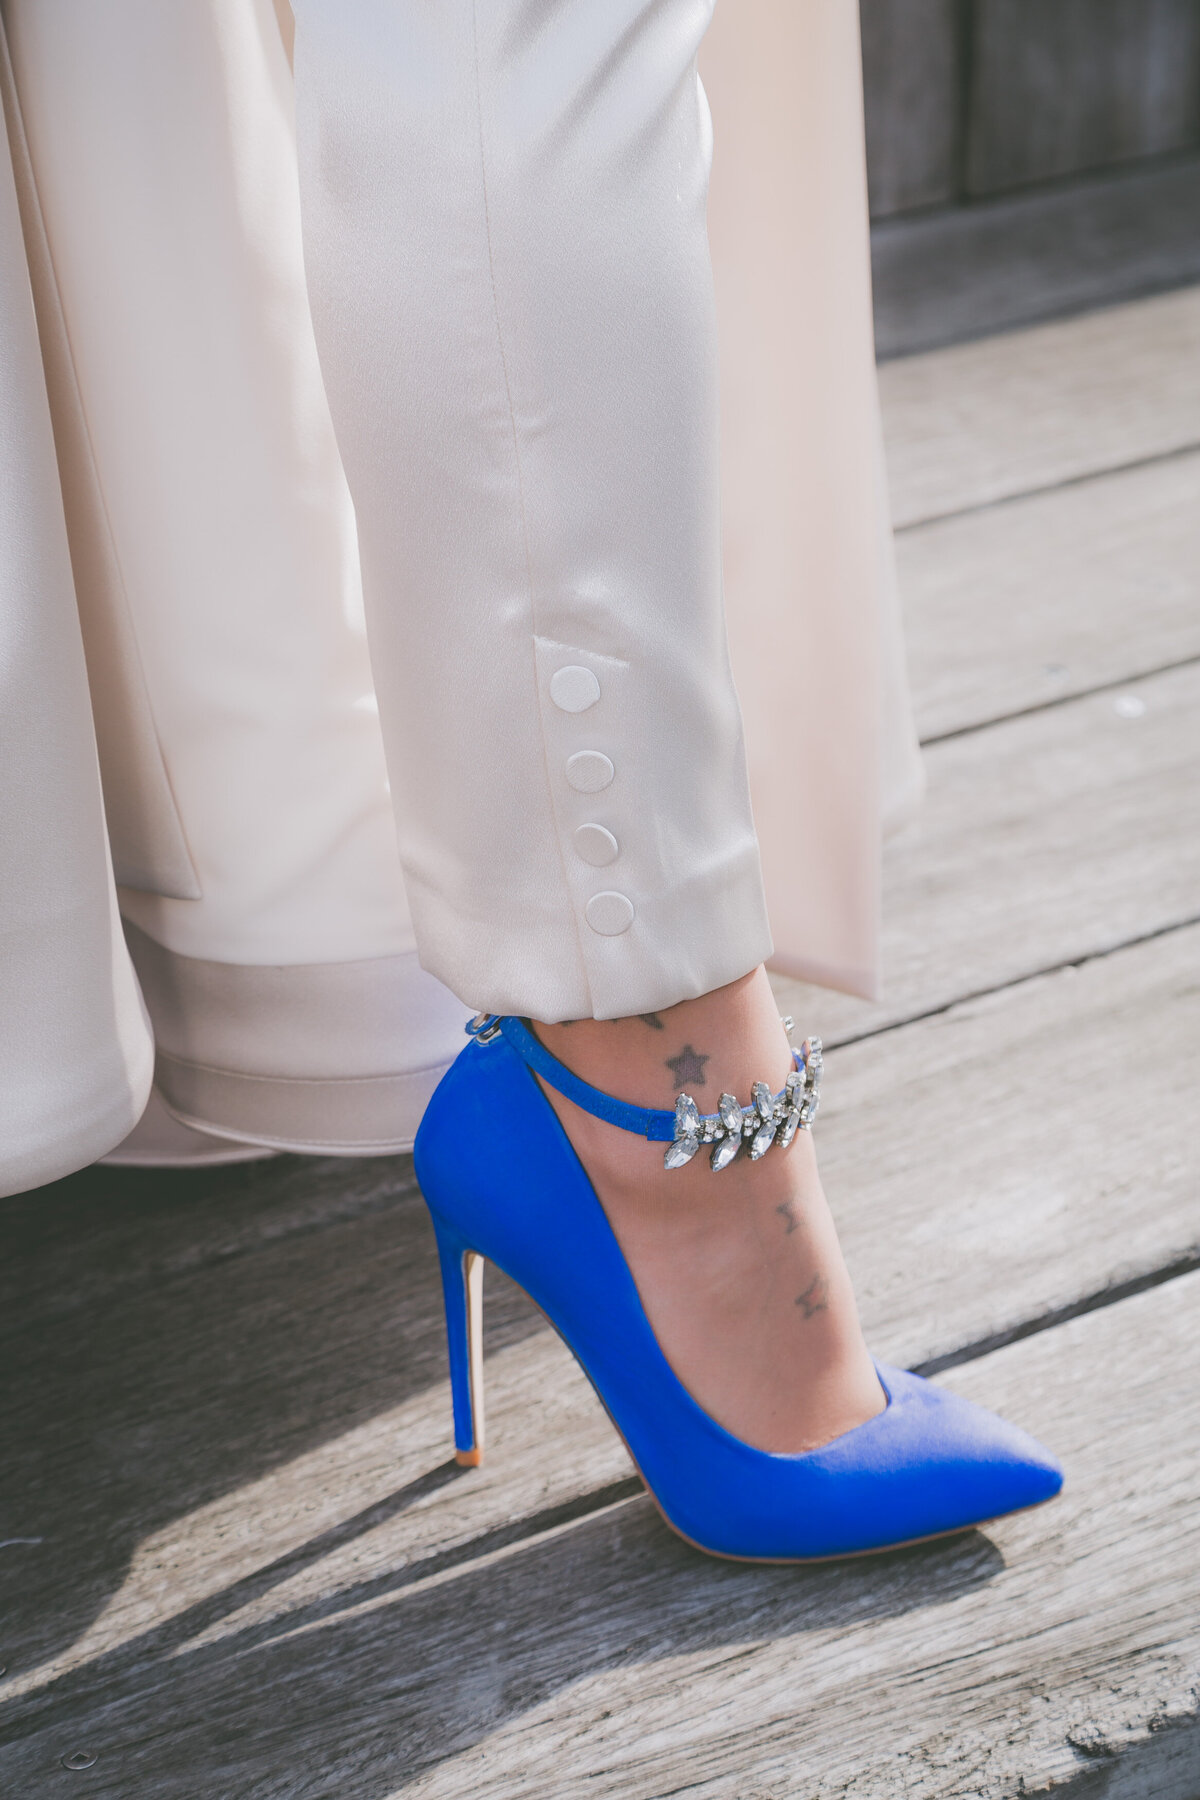 Stylish bride shows off her blue heels.